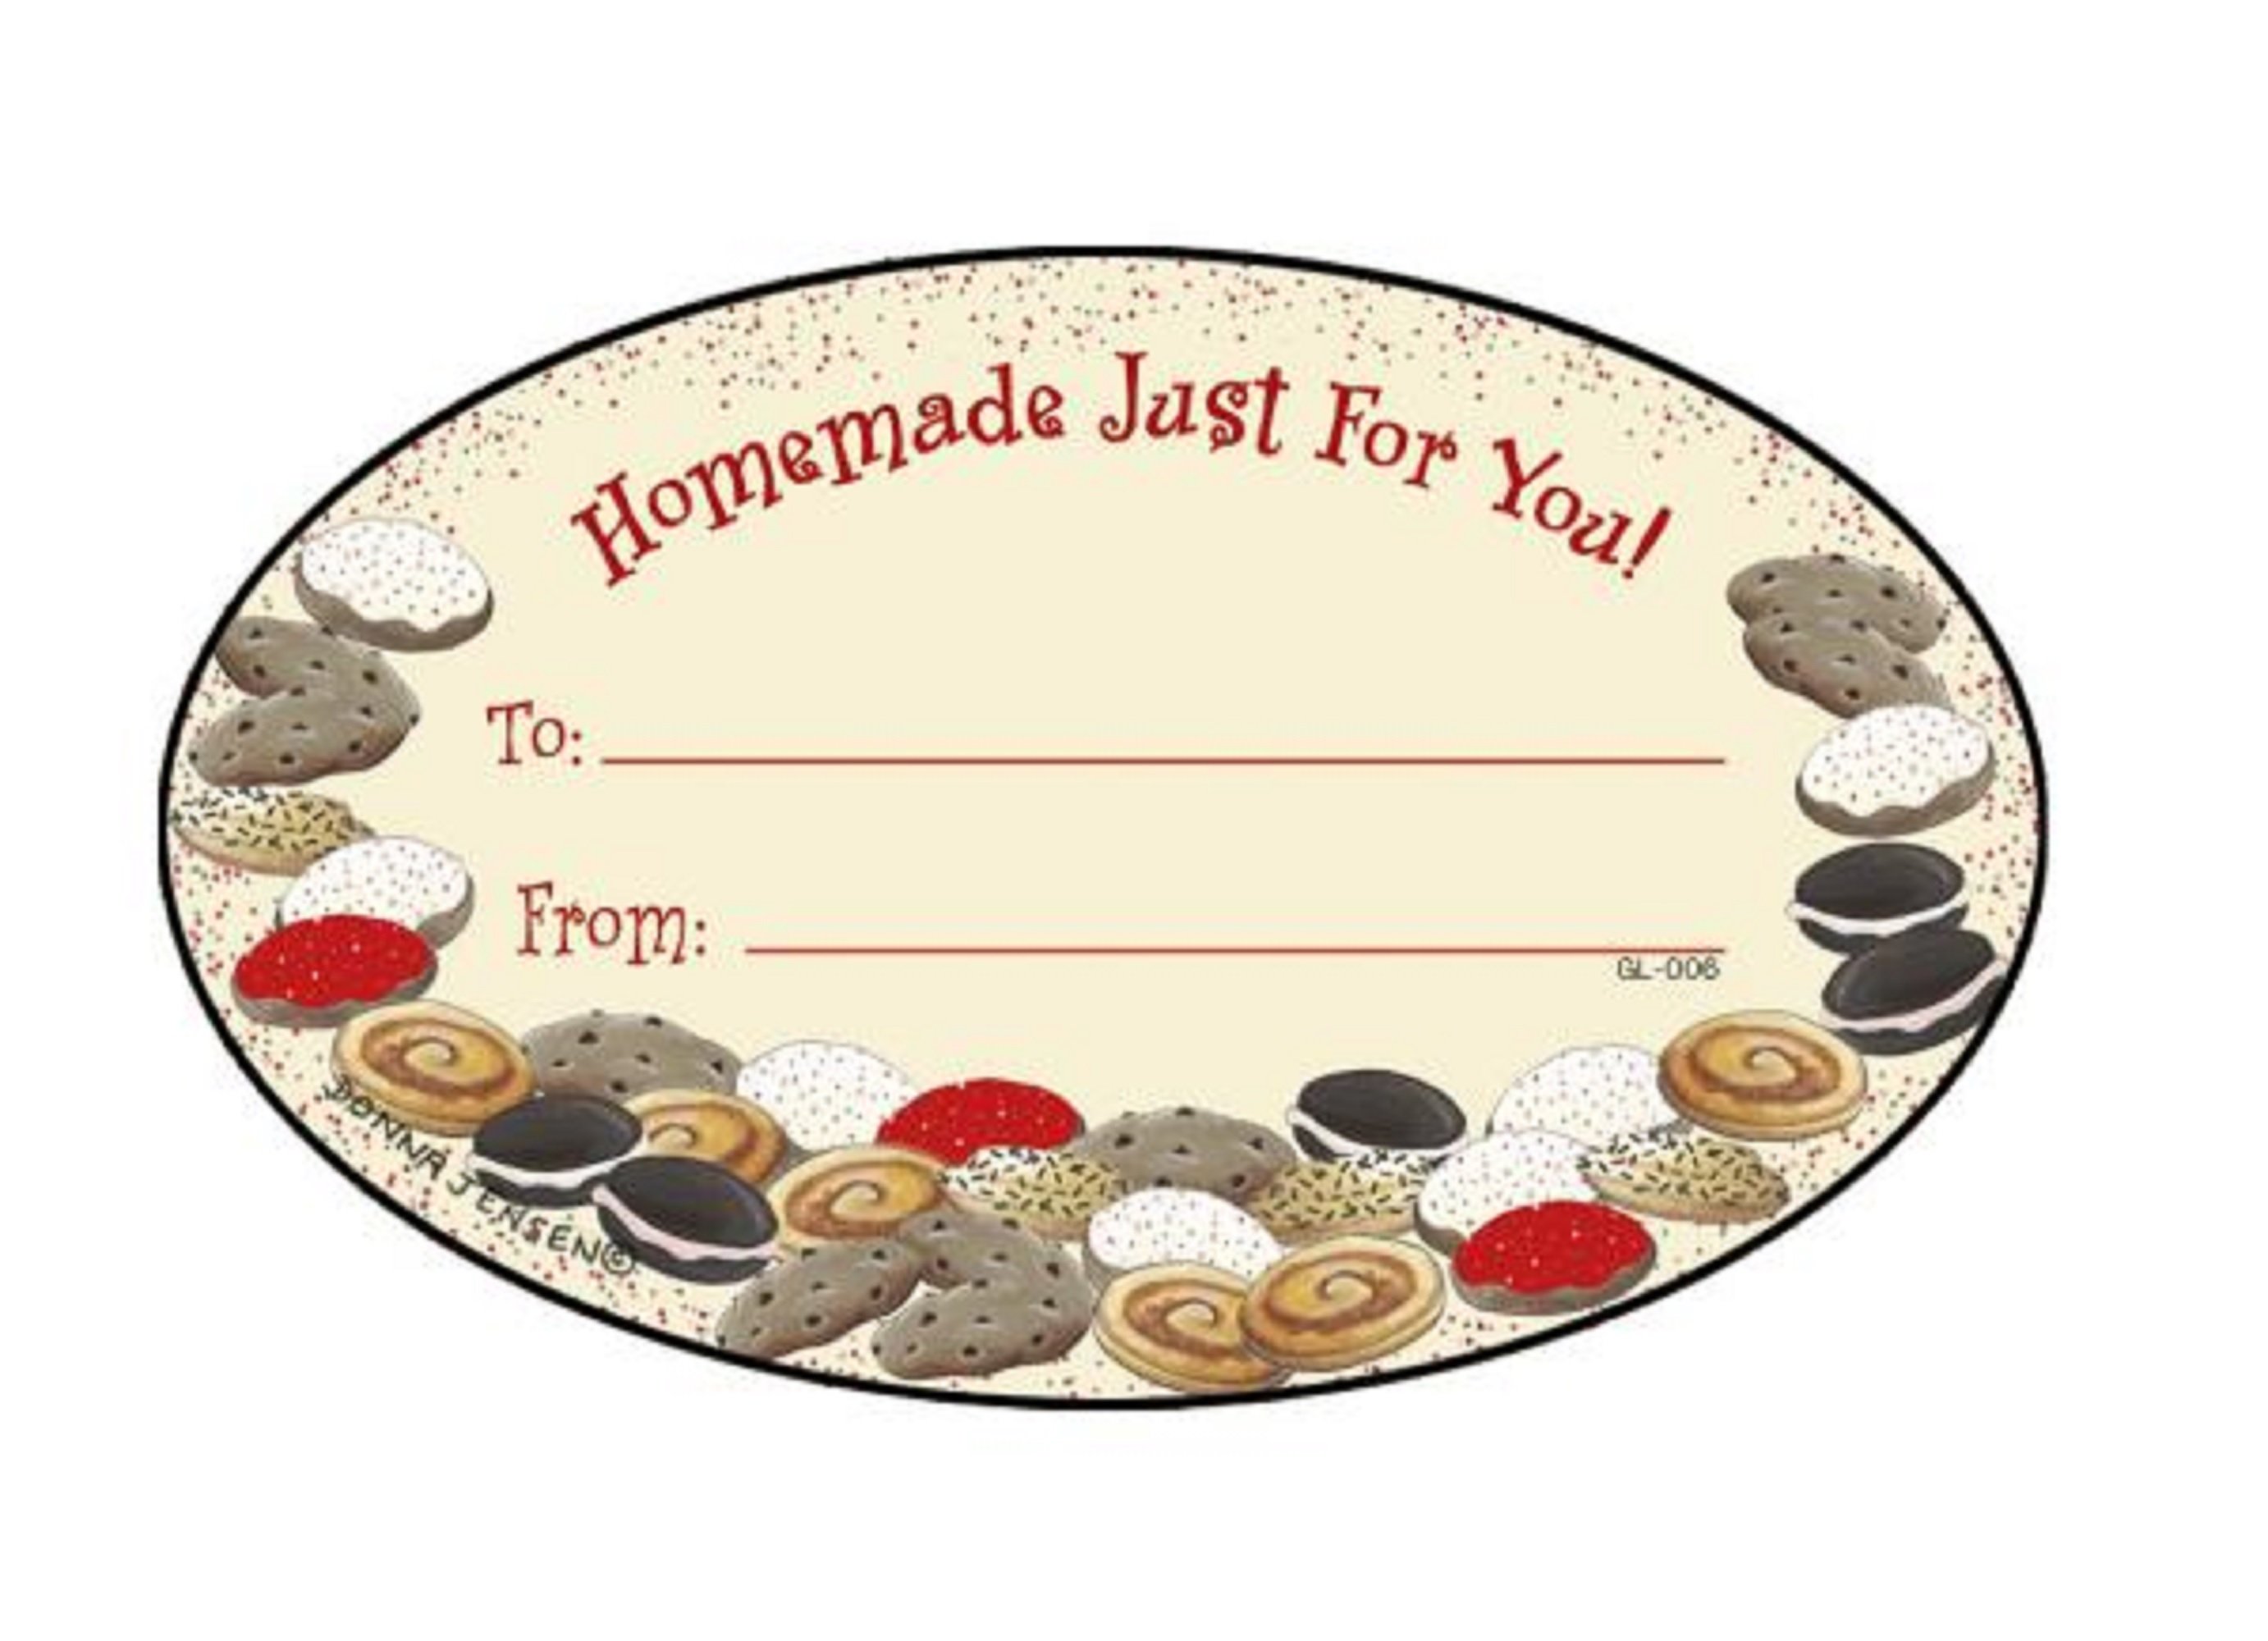 Homemade Cookies Design Oval Labels For Homemade Food Gifts 10 Labels 3in X 4in GL006 